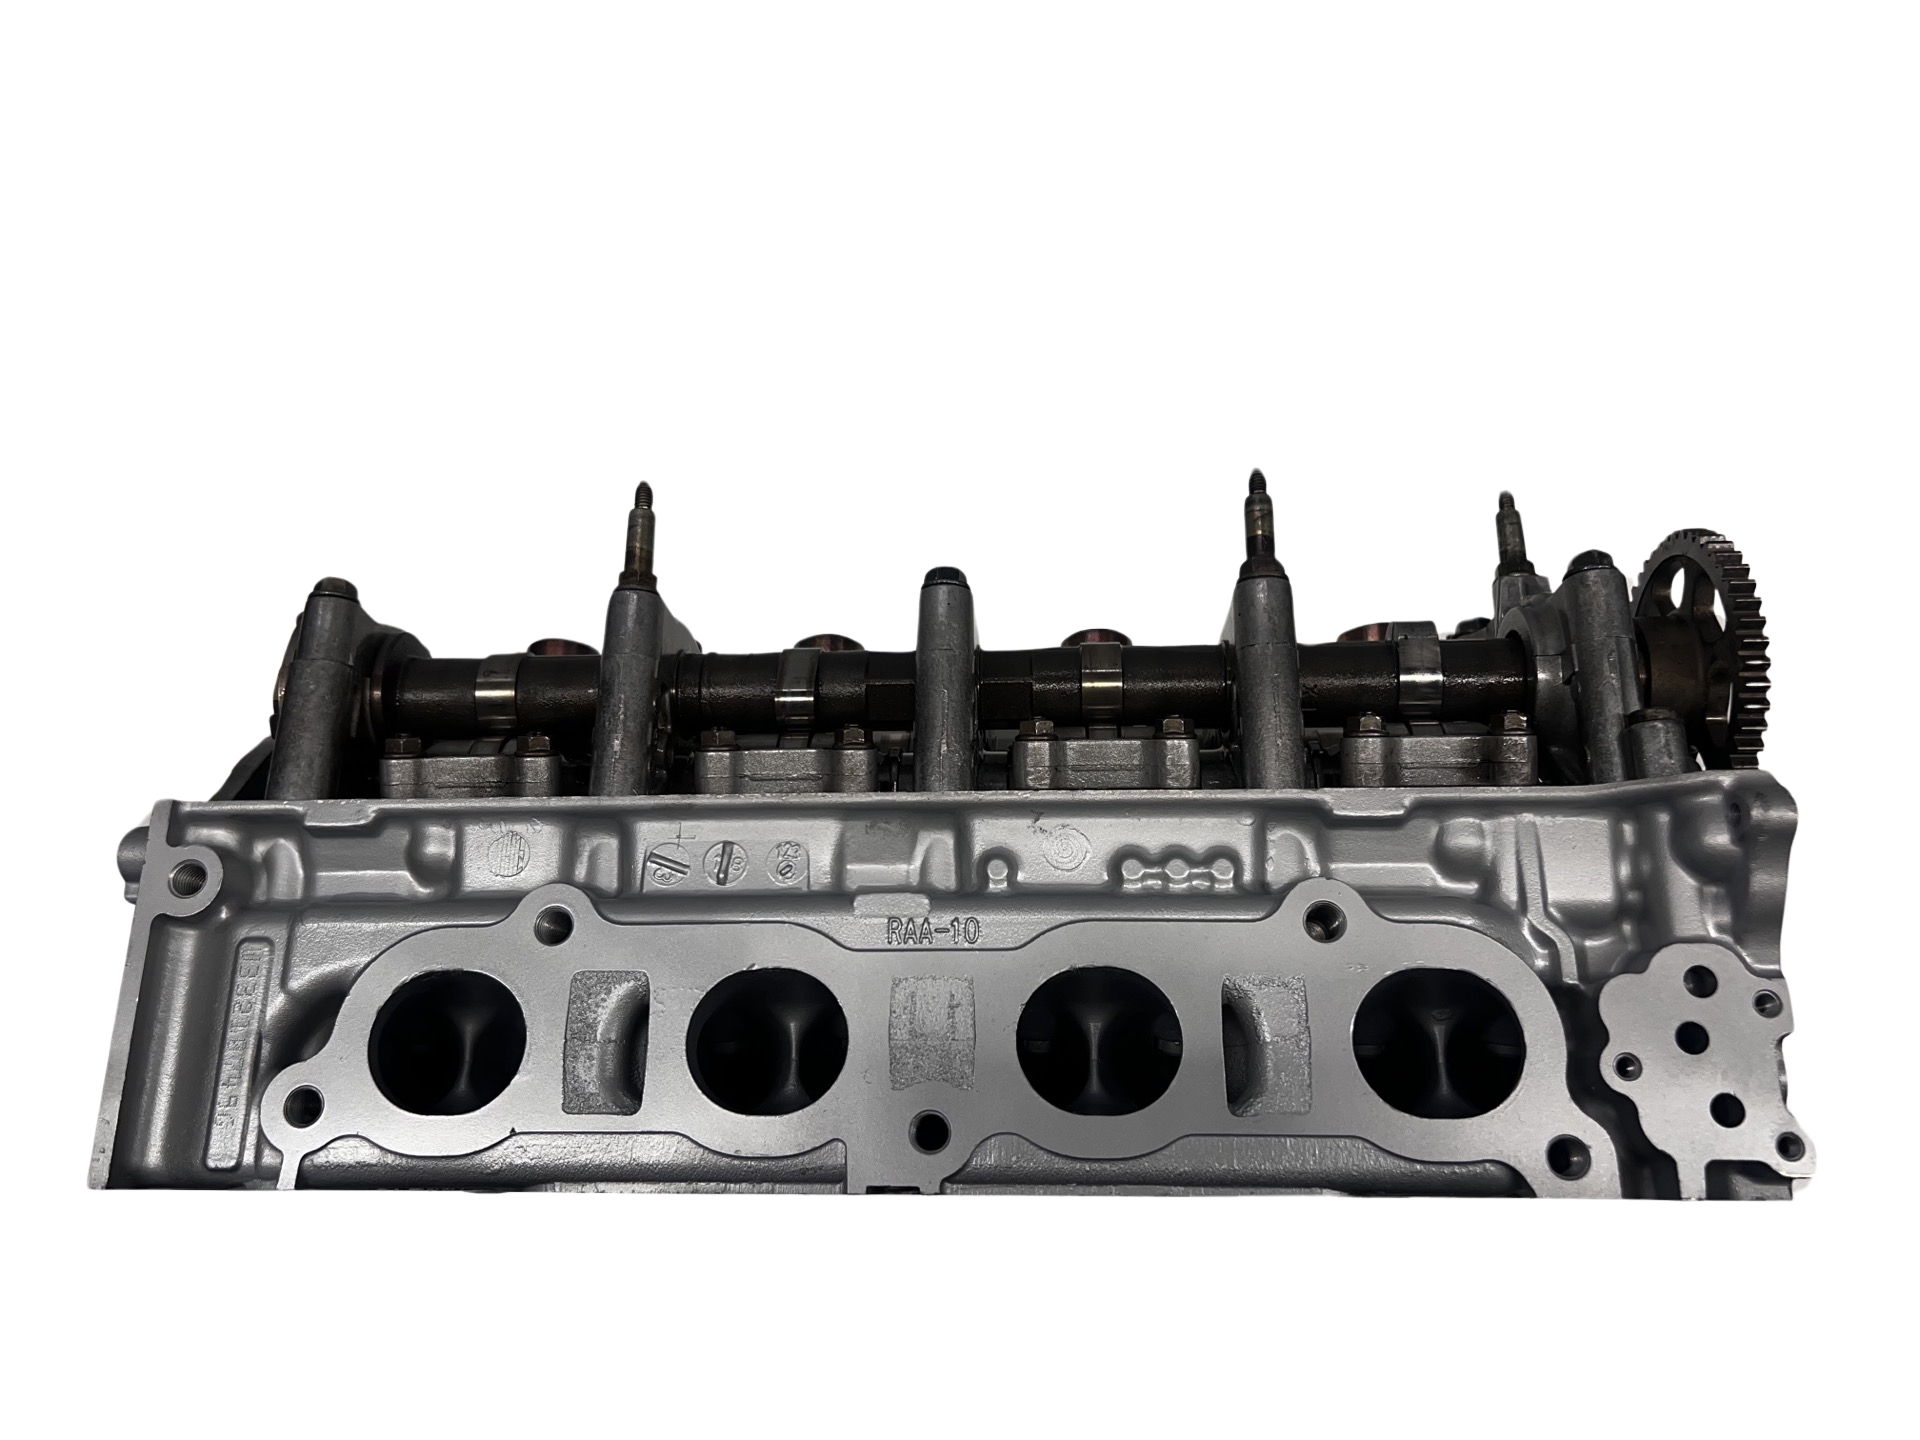 Exhaust side of cylinder head for a Honda K24A RAA 2.4L